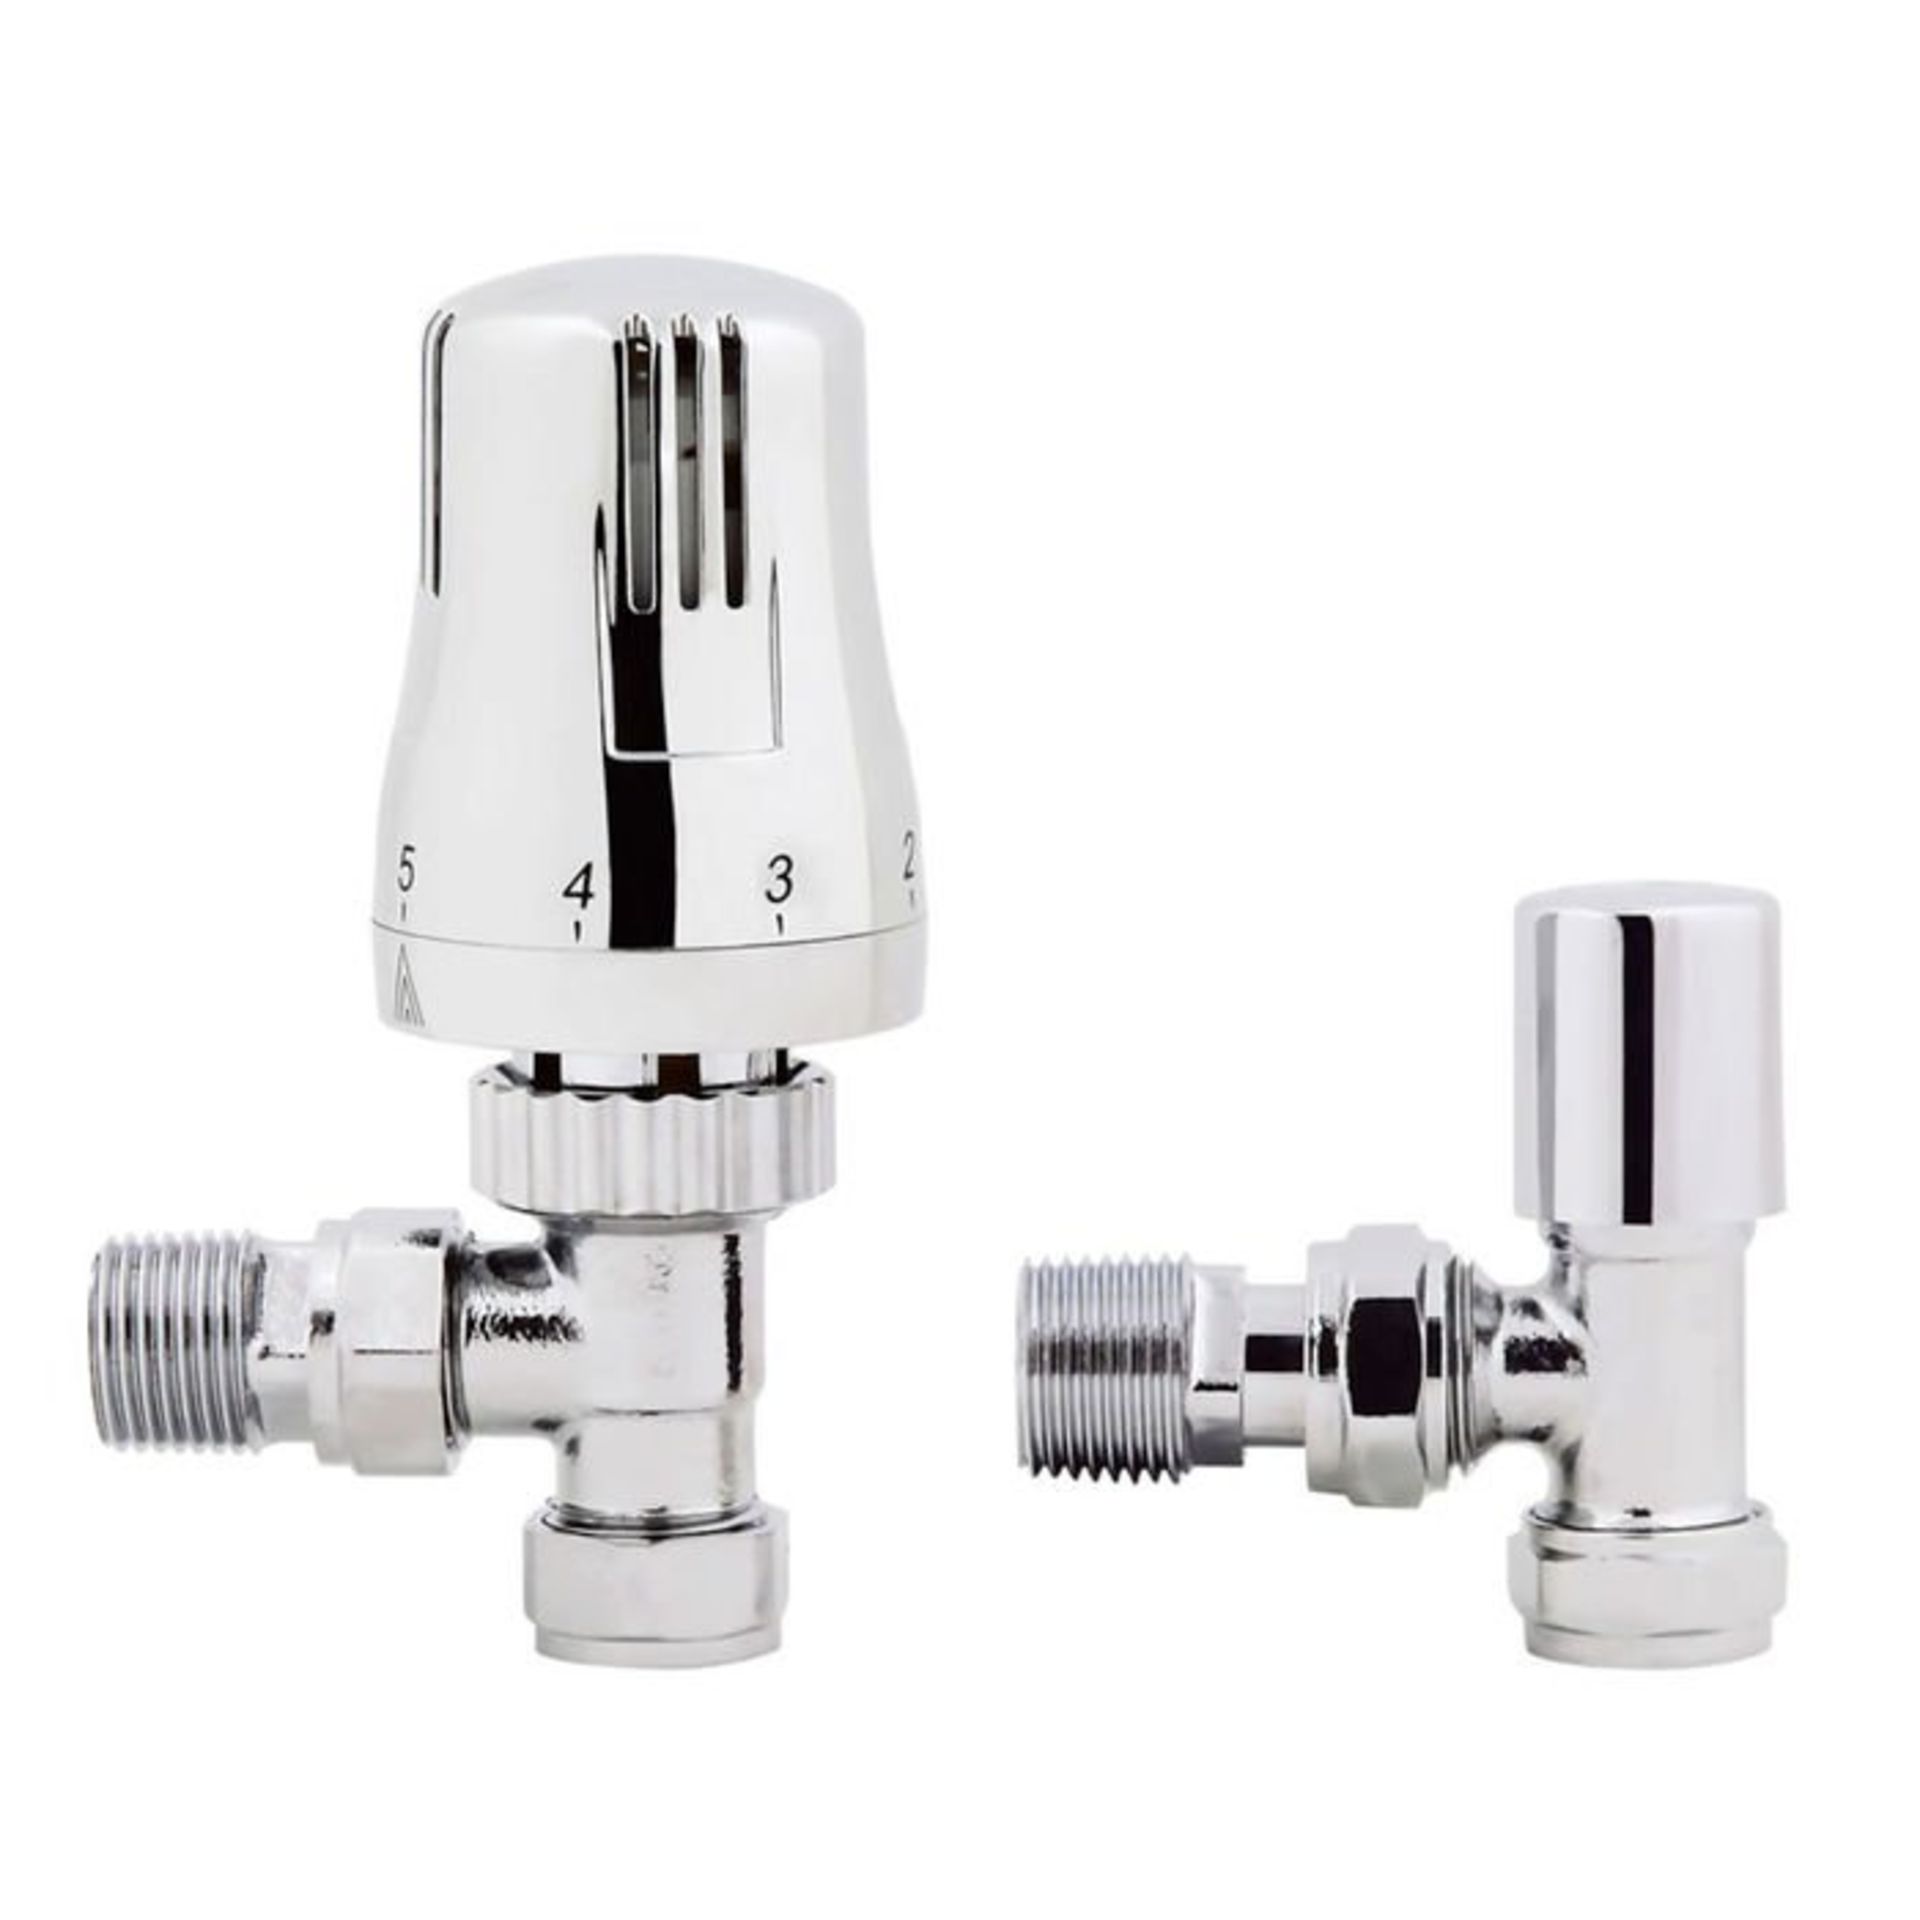 (L136) 15mm Standard Connection Thermostatic Angled Chrome Radiator Valves. Chrome Plated Solid